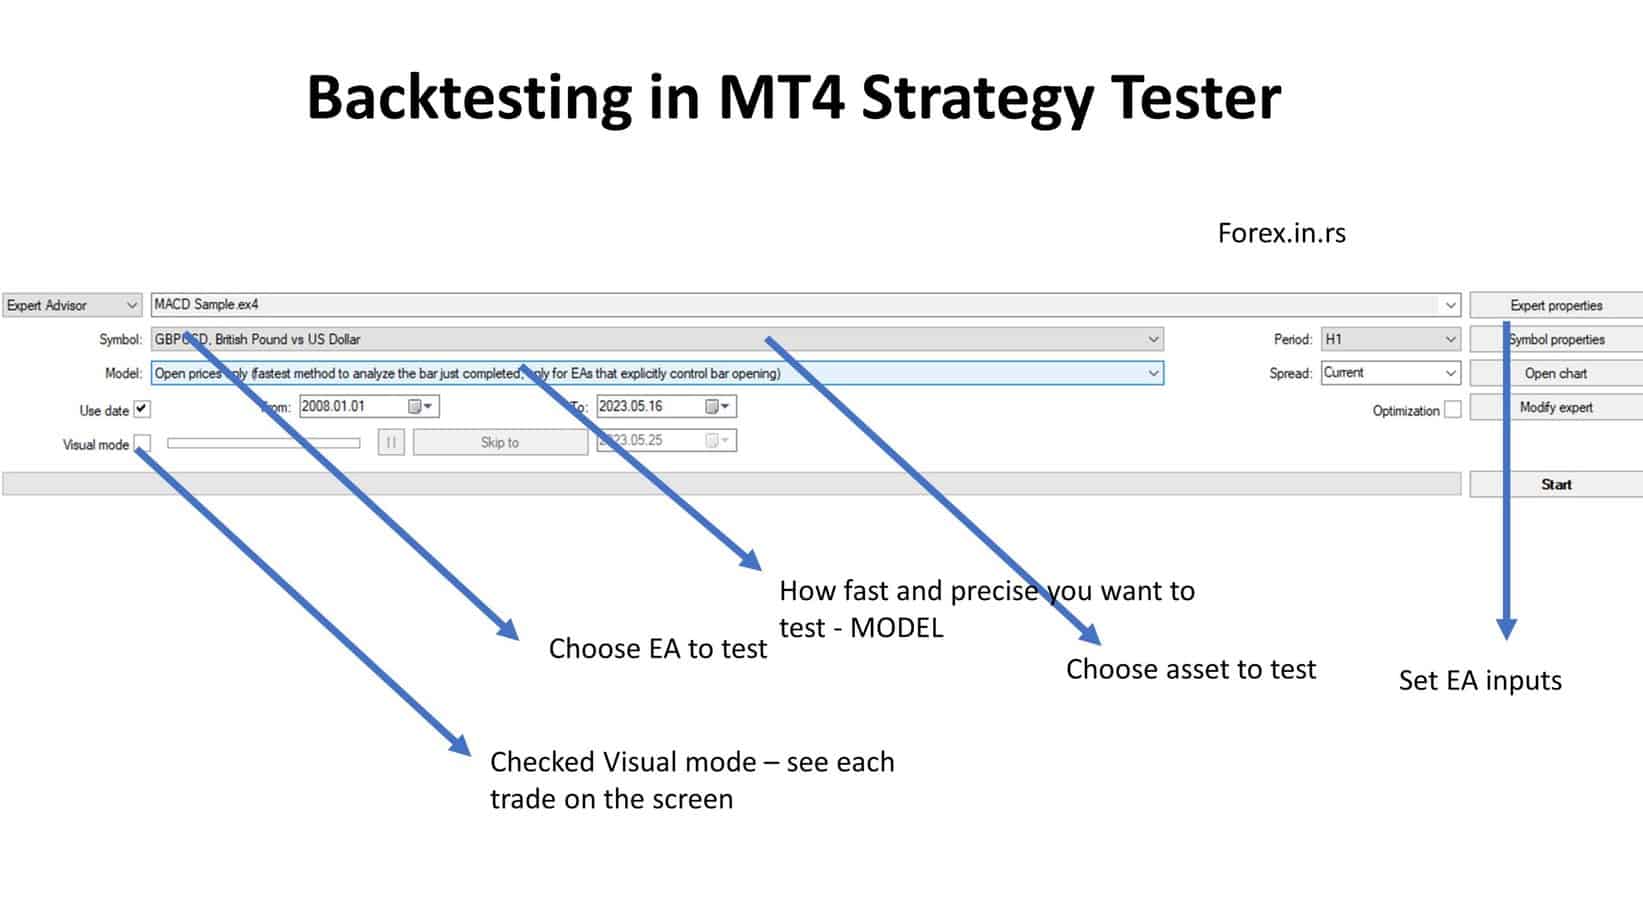 how to use mt4 strategy tester for backtesting